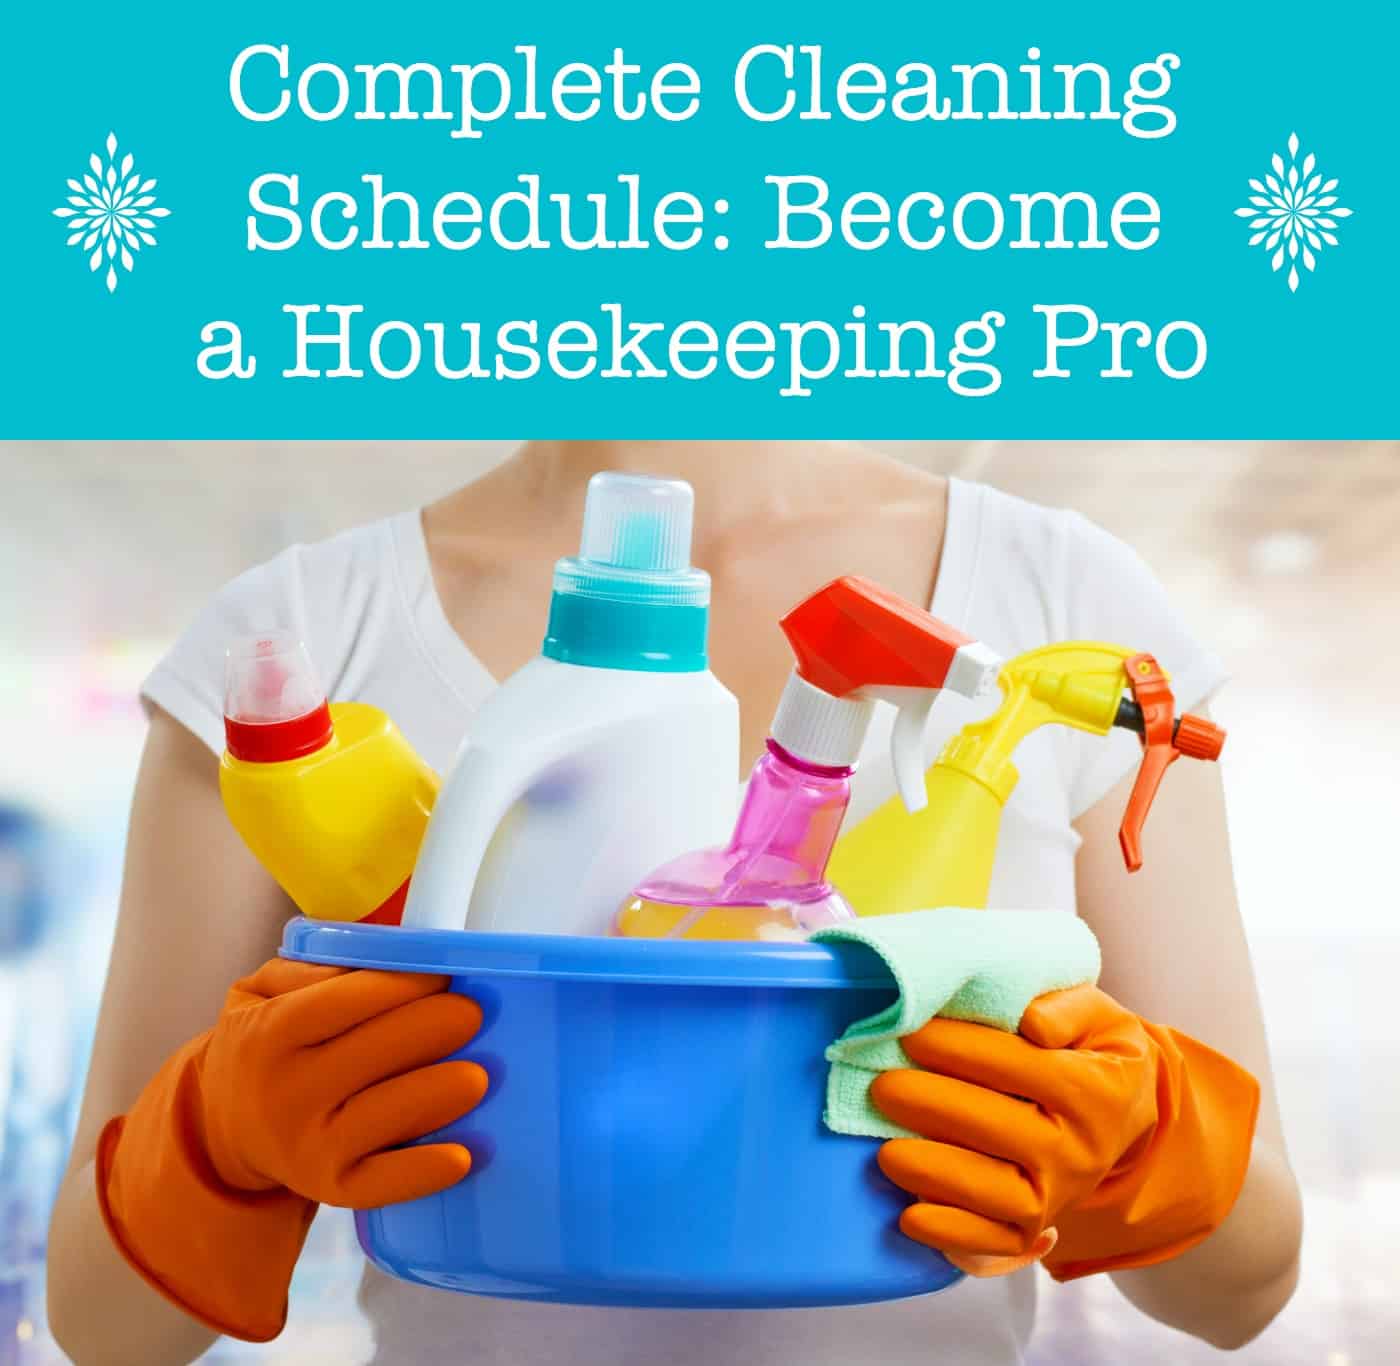 Complete Cleaning Schedule: Become a Housekeeping Pro